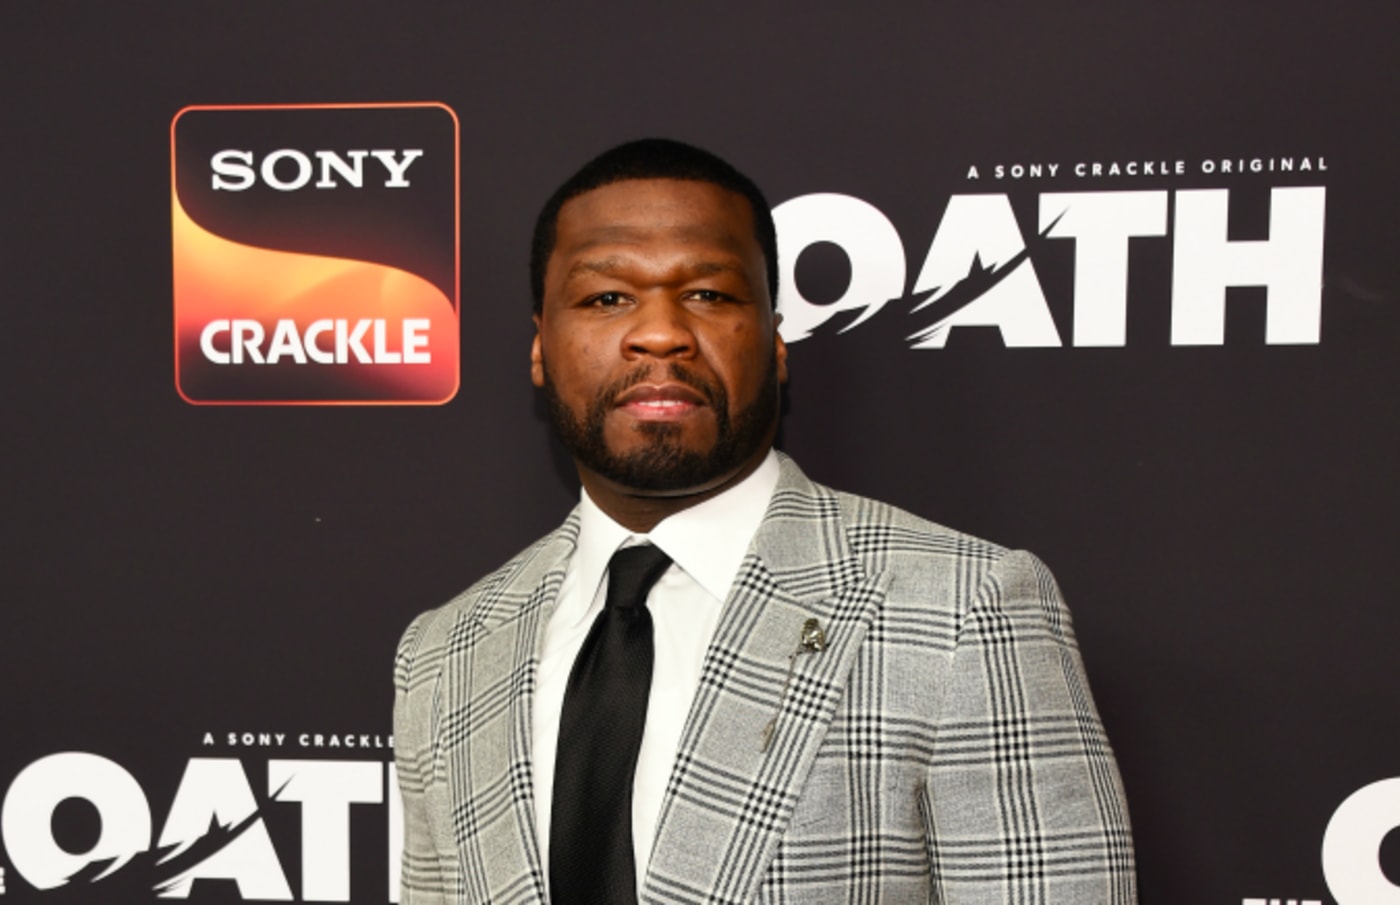 Curtis "50 Cent" Jackson arrives at "The Oath" Season 2 exclusive screening